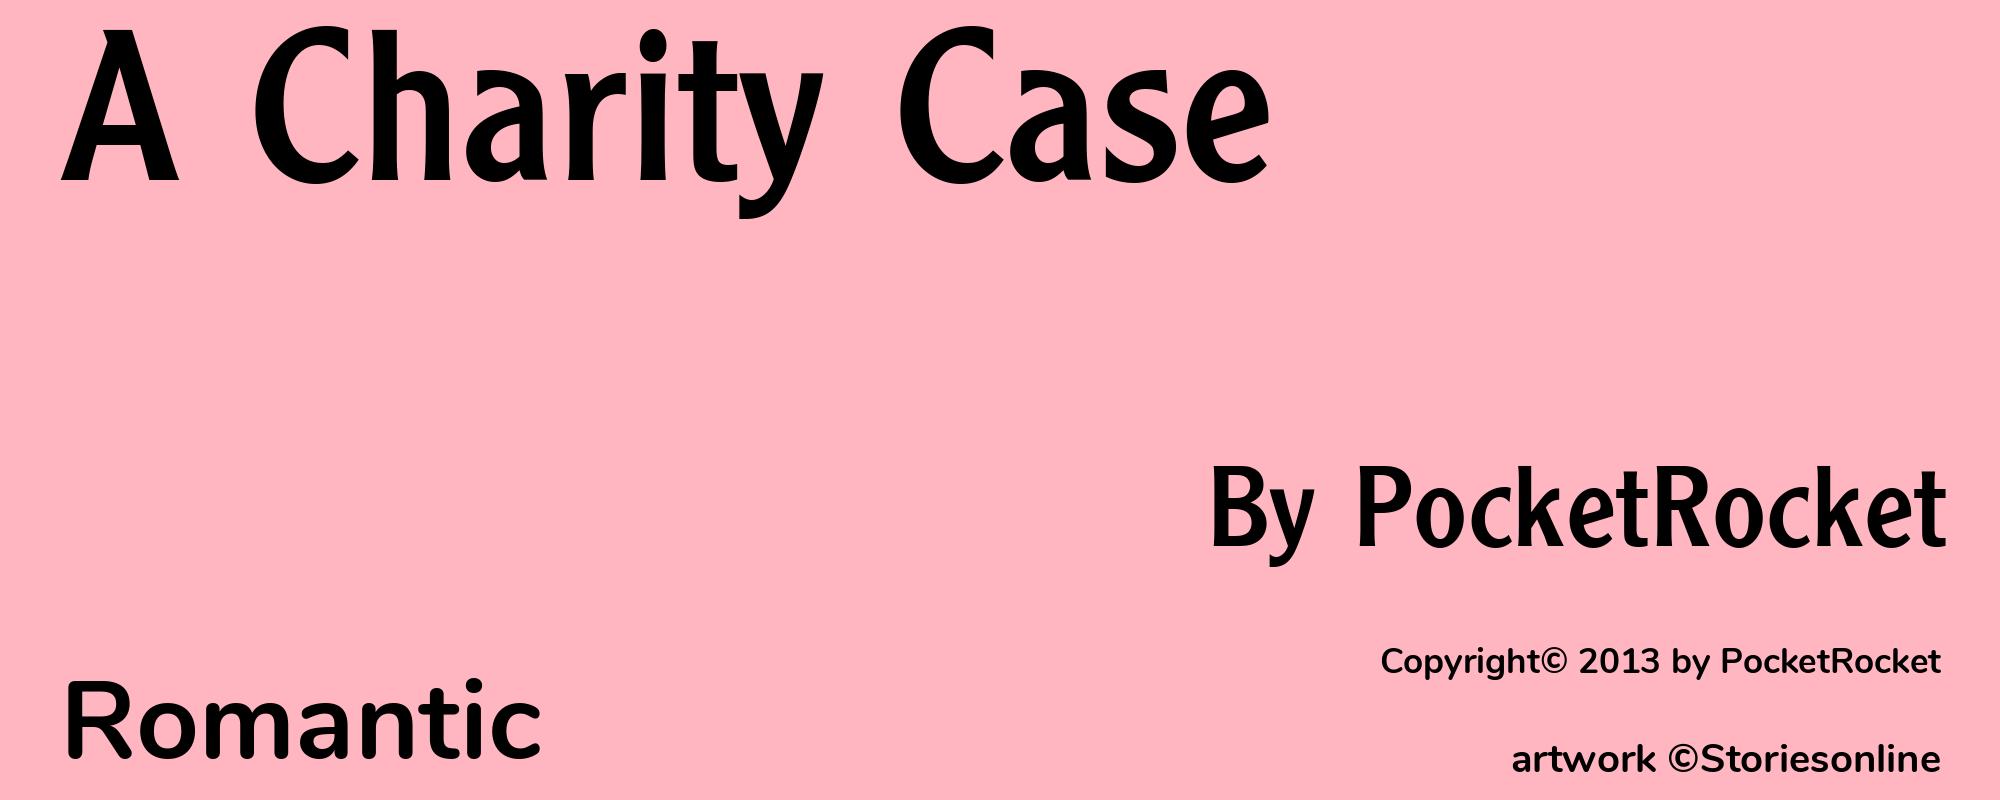 A Charity Case - Cover